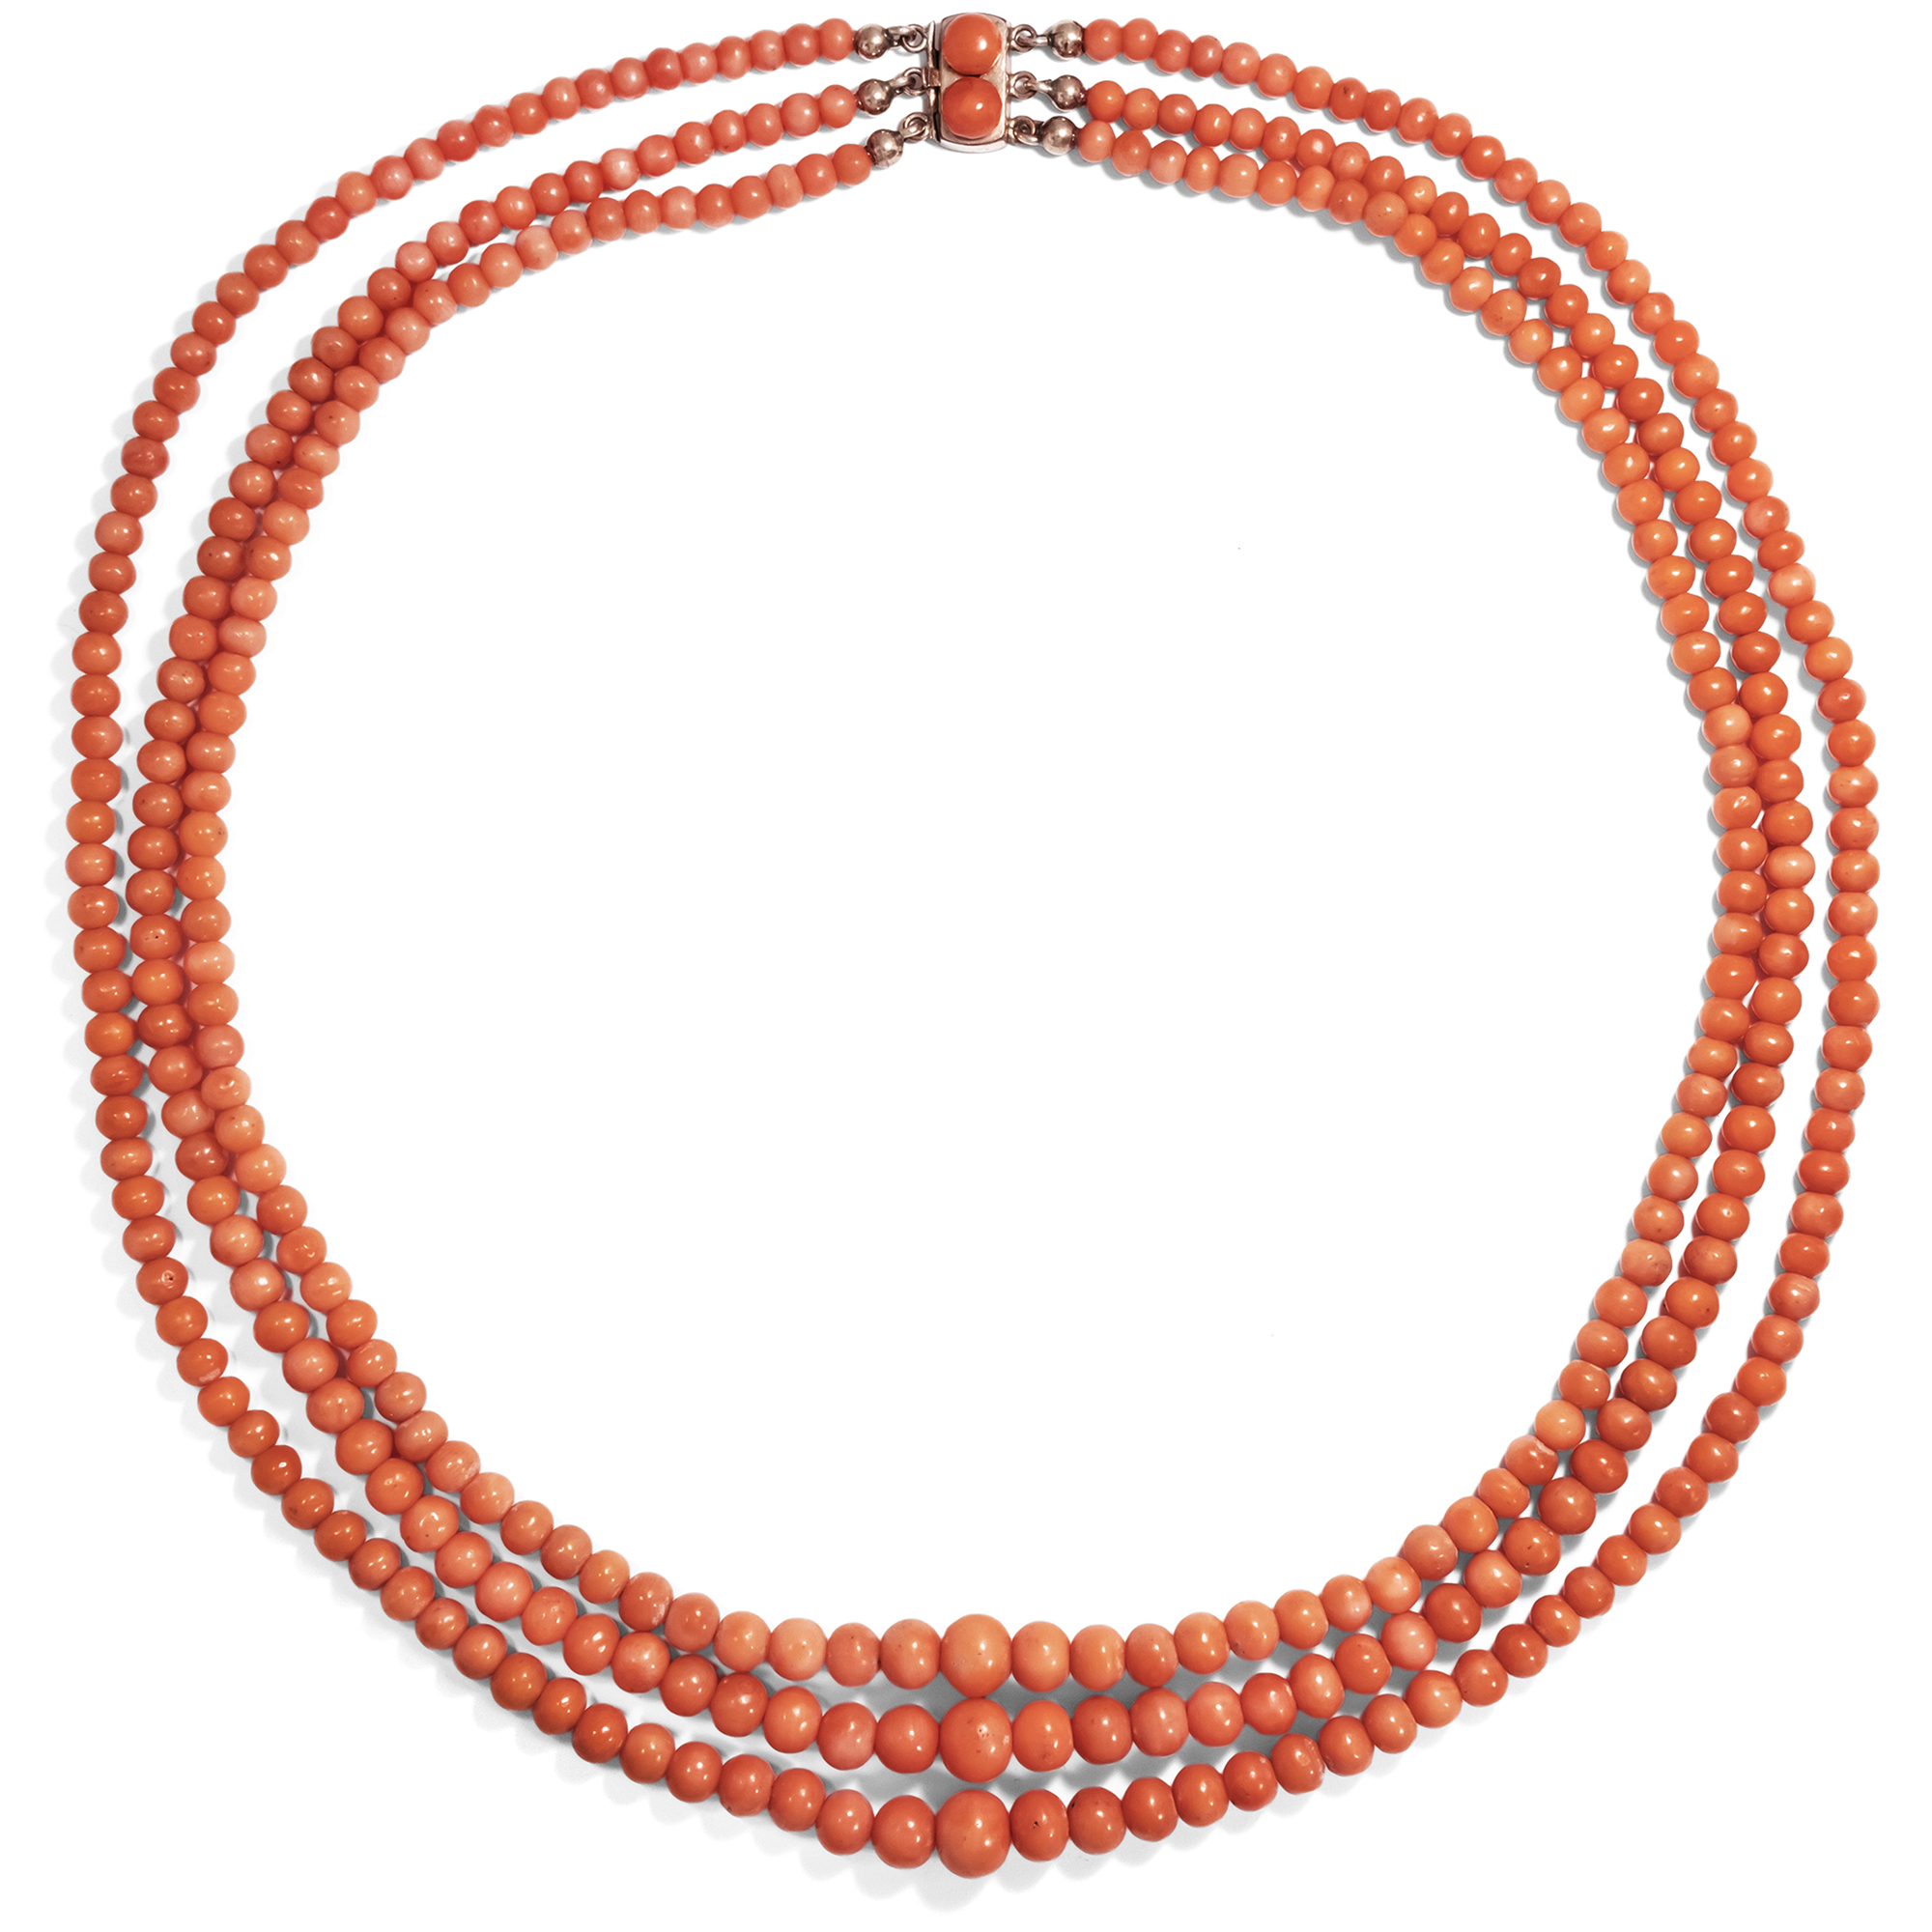 Antique Coral Necklace in Three Strands, Italy around 1900